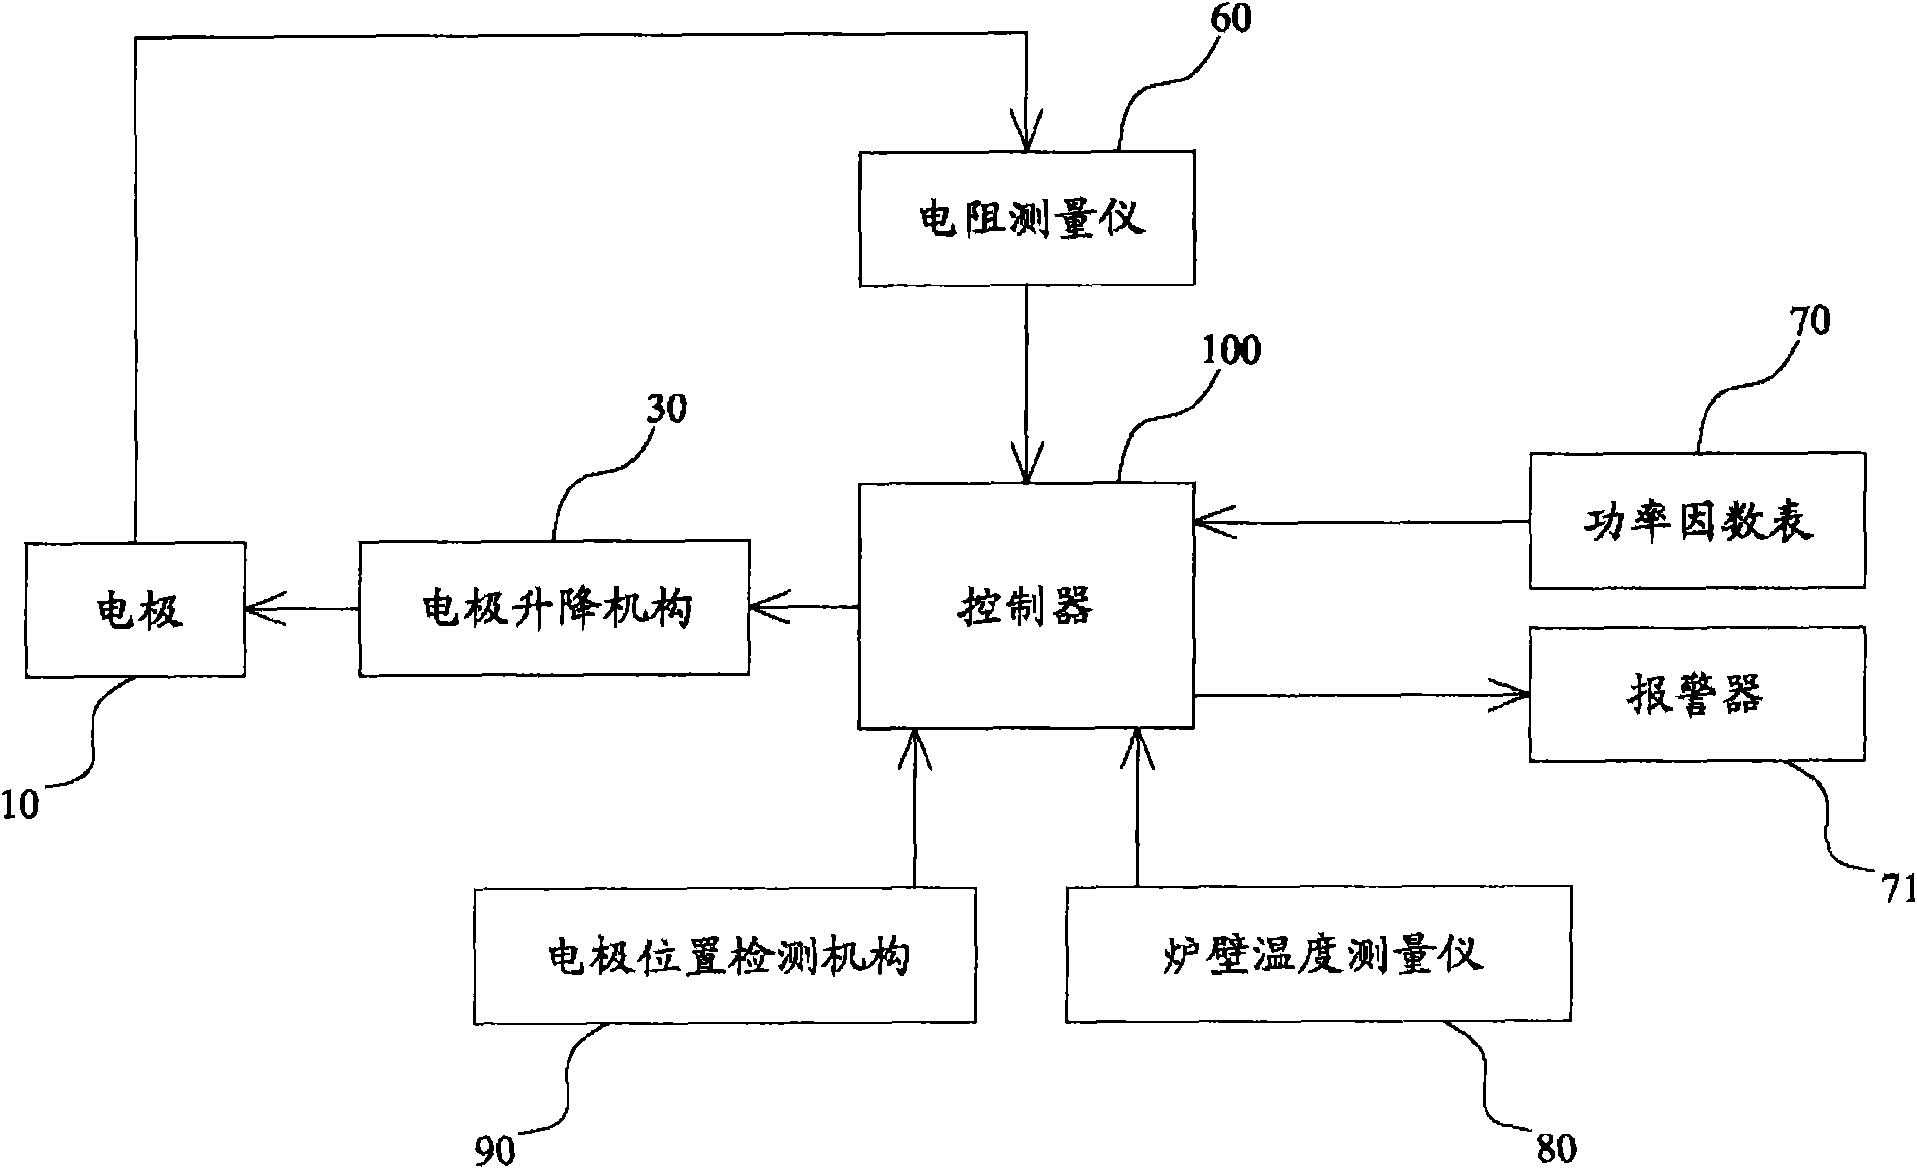 Automatic control device of electrode deep insertion of submerged electric furnace